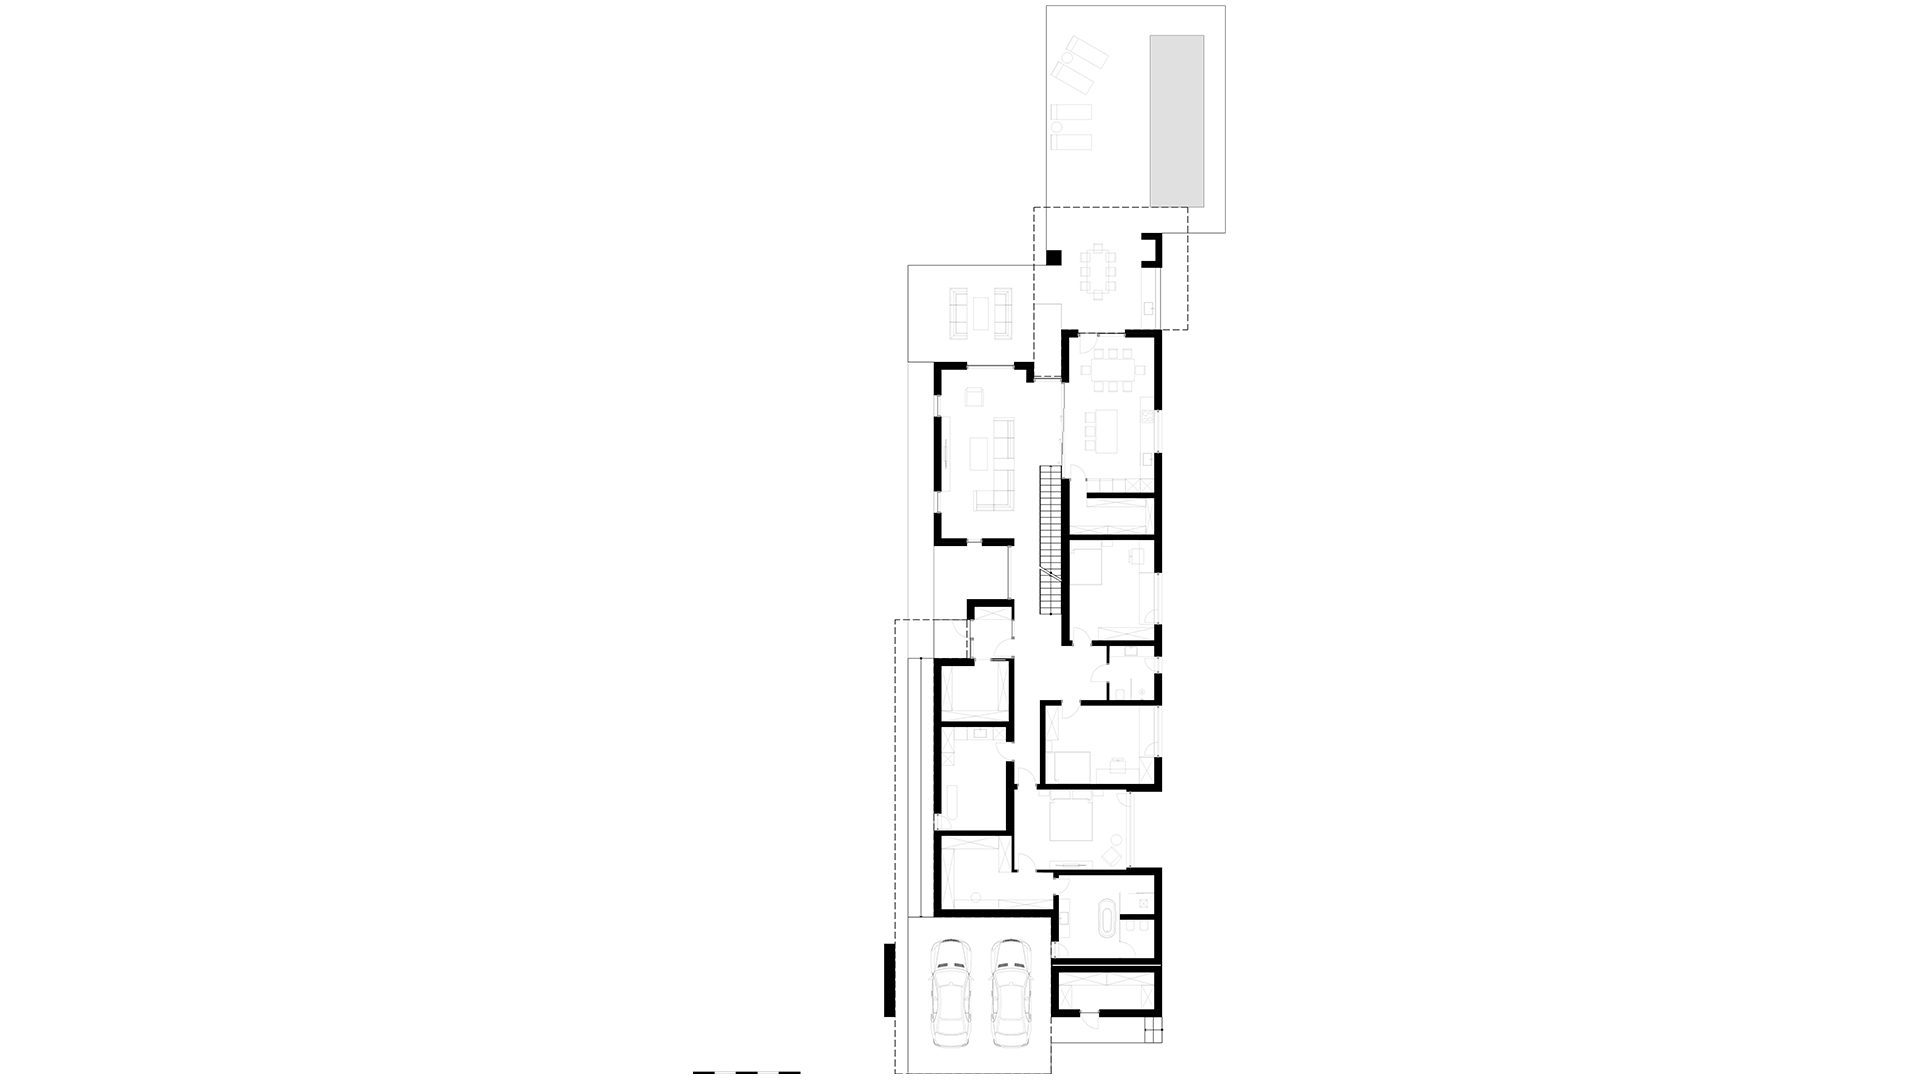 Excellent layout of a two-storey house